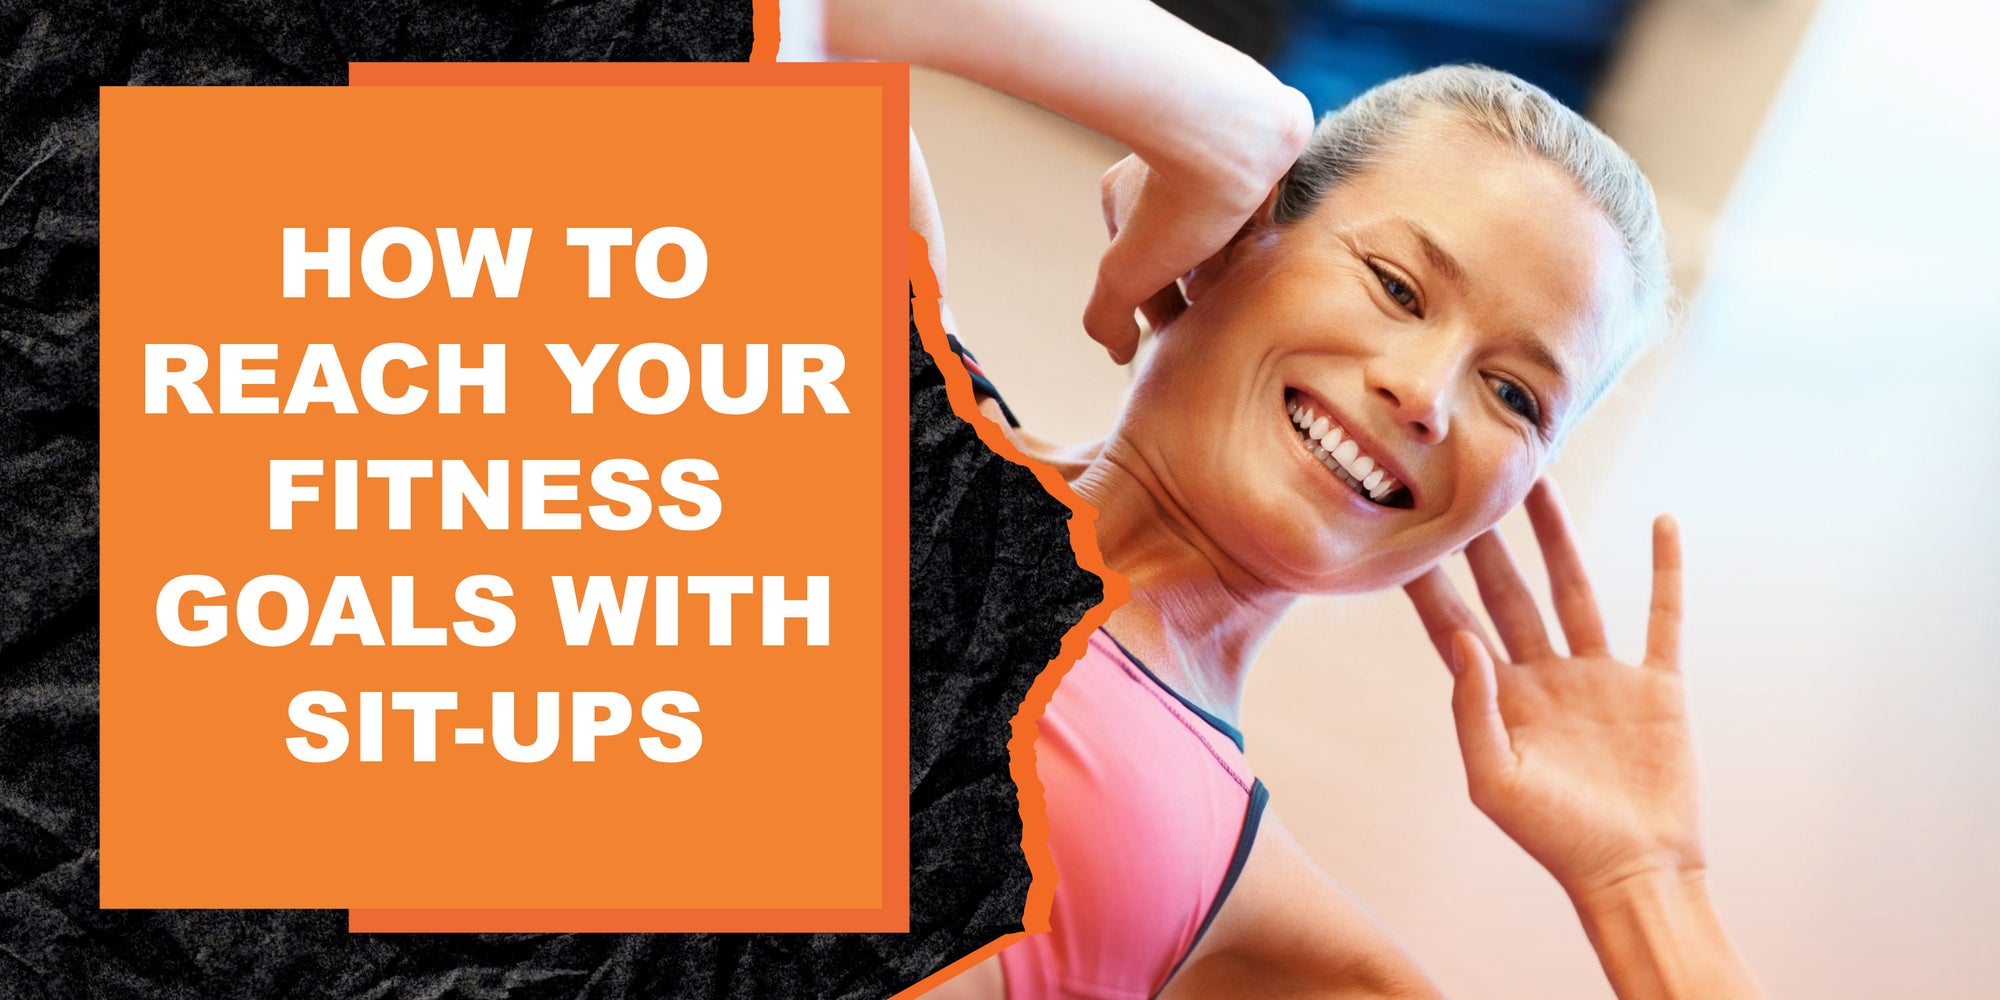 How to Reach Your Fitness Goals With Sit-Ups